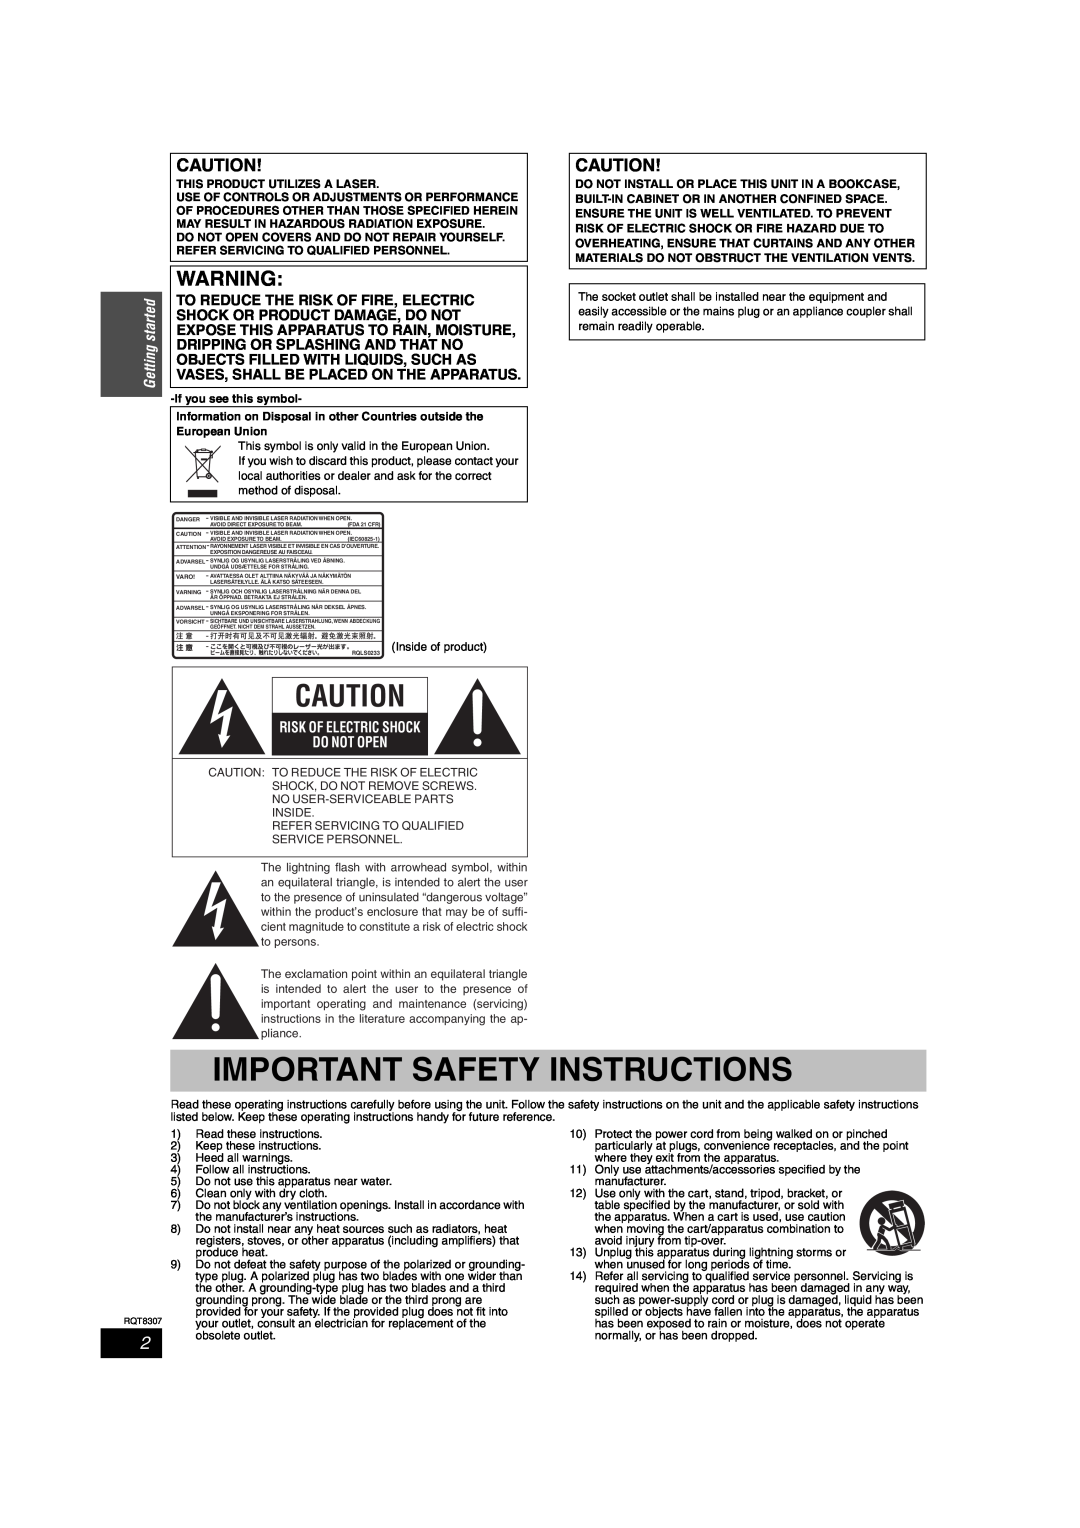 Panasonic DMR-EH60 warranty Important Safety Instructions, Getting started, Risk Of Electric Shock Do Not Open 